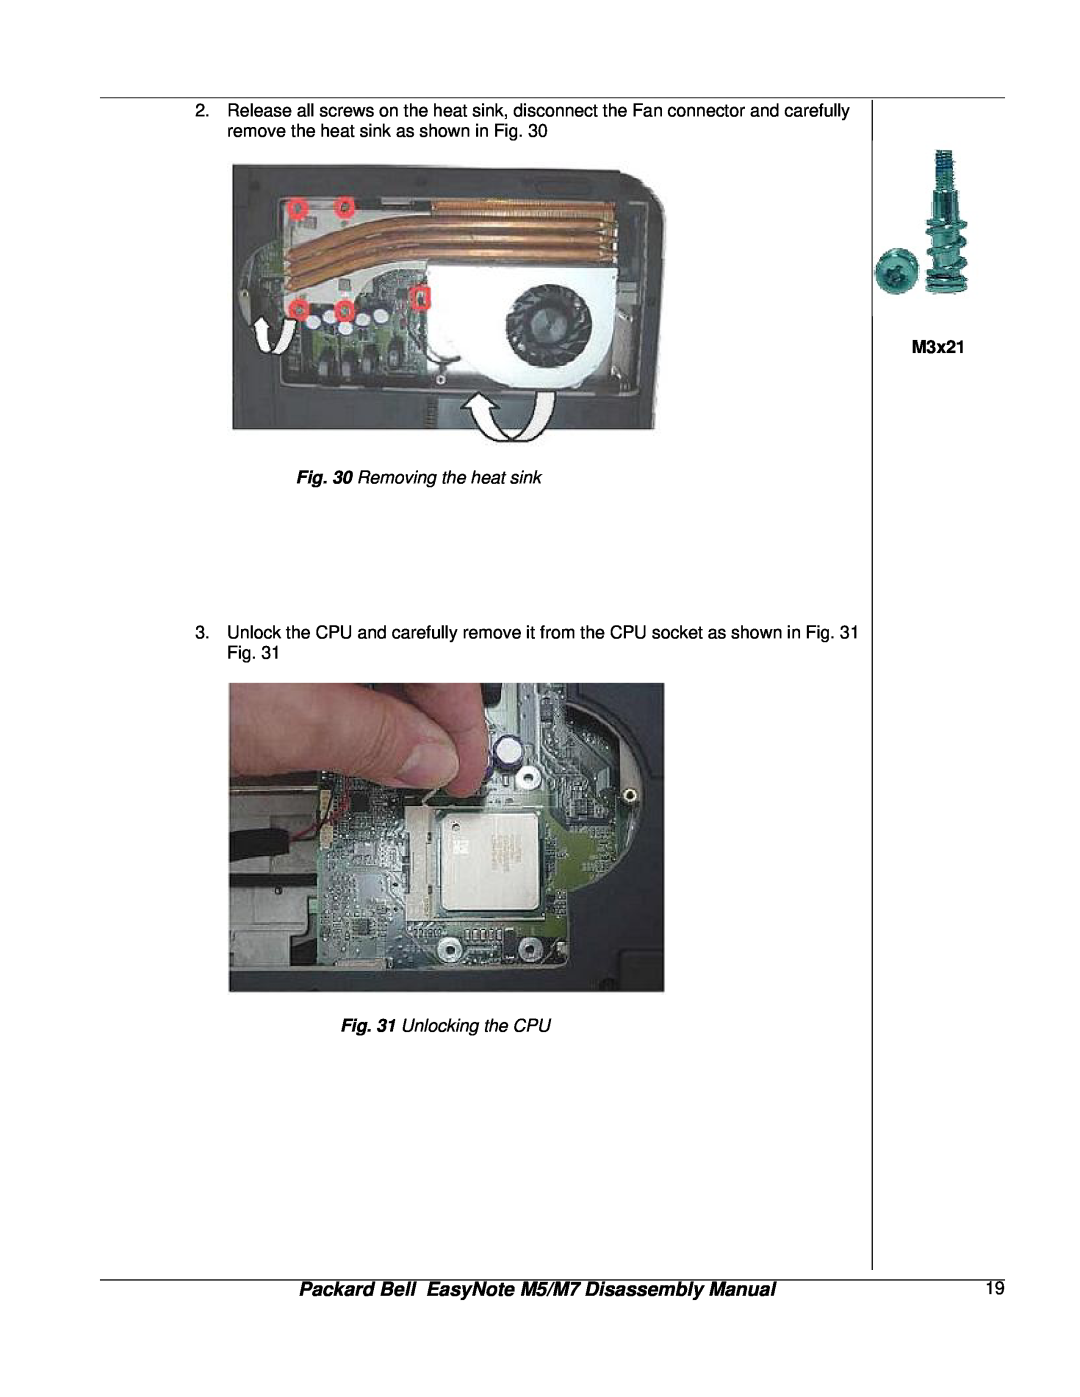 NEC manual Removing the heat sink, Unlocking the CPU, M3x21, Packard Bell EasyNote M5/M7 Disassembly Manual 